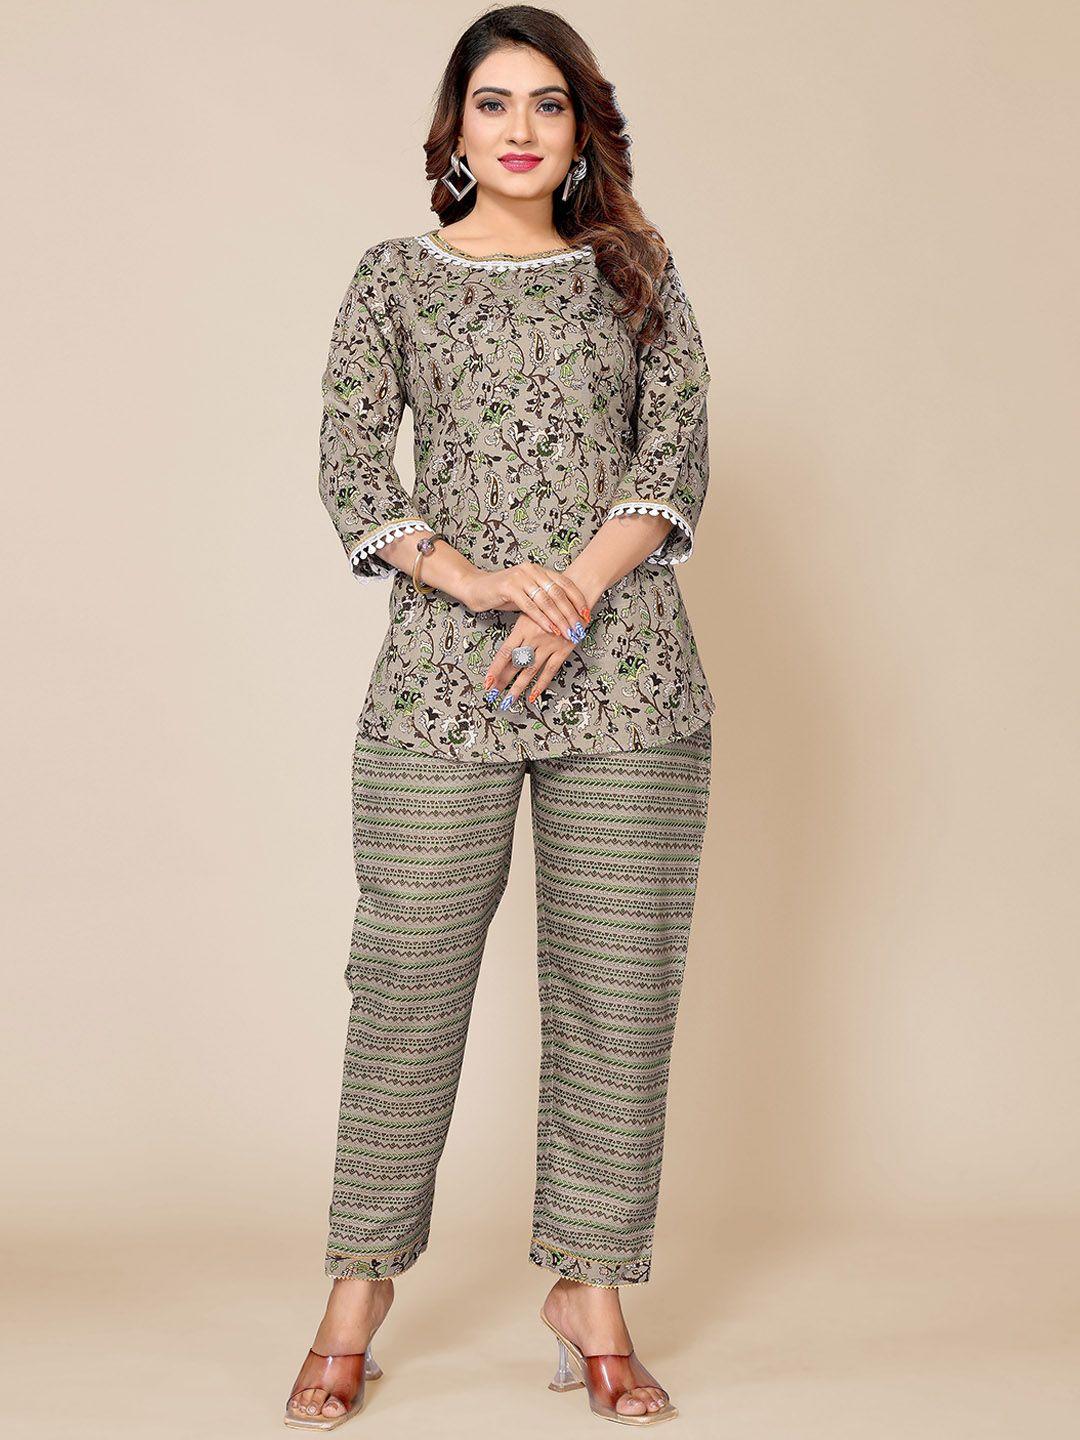 krimmple floral printed round neck top with trousers co-ords set